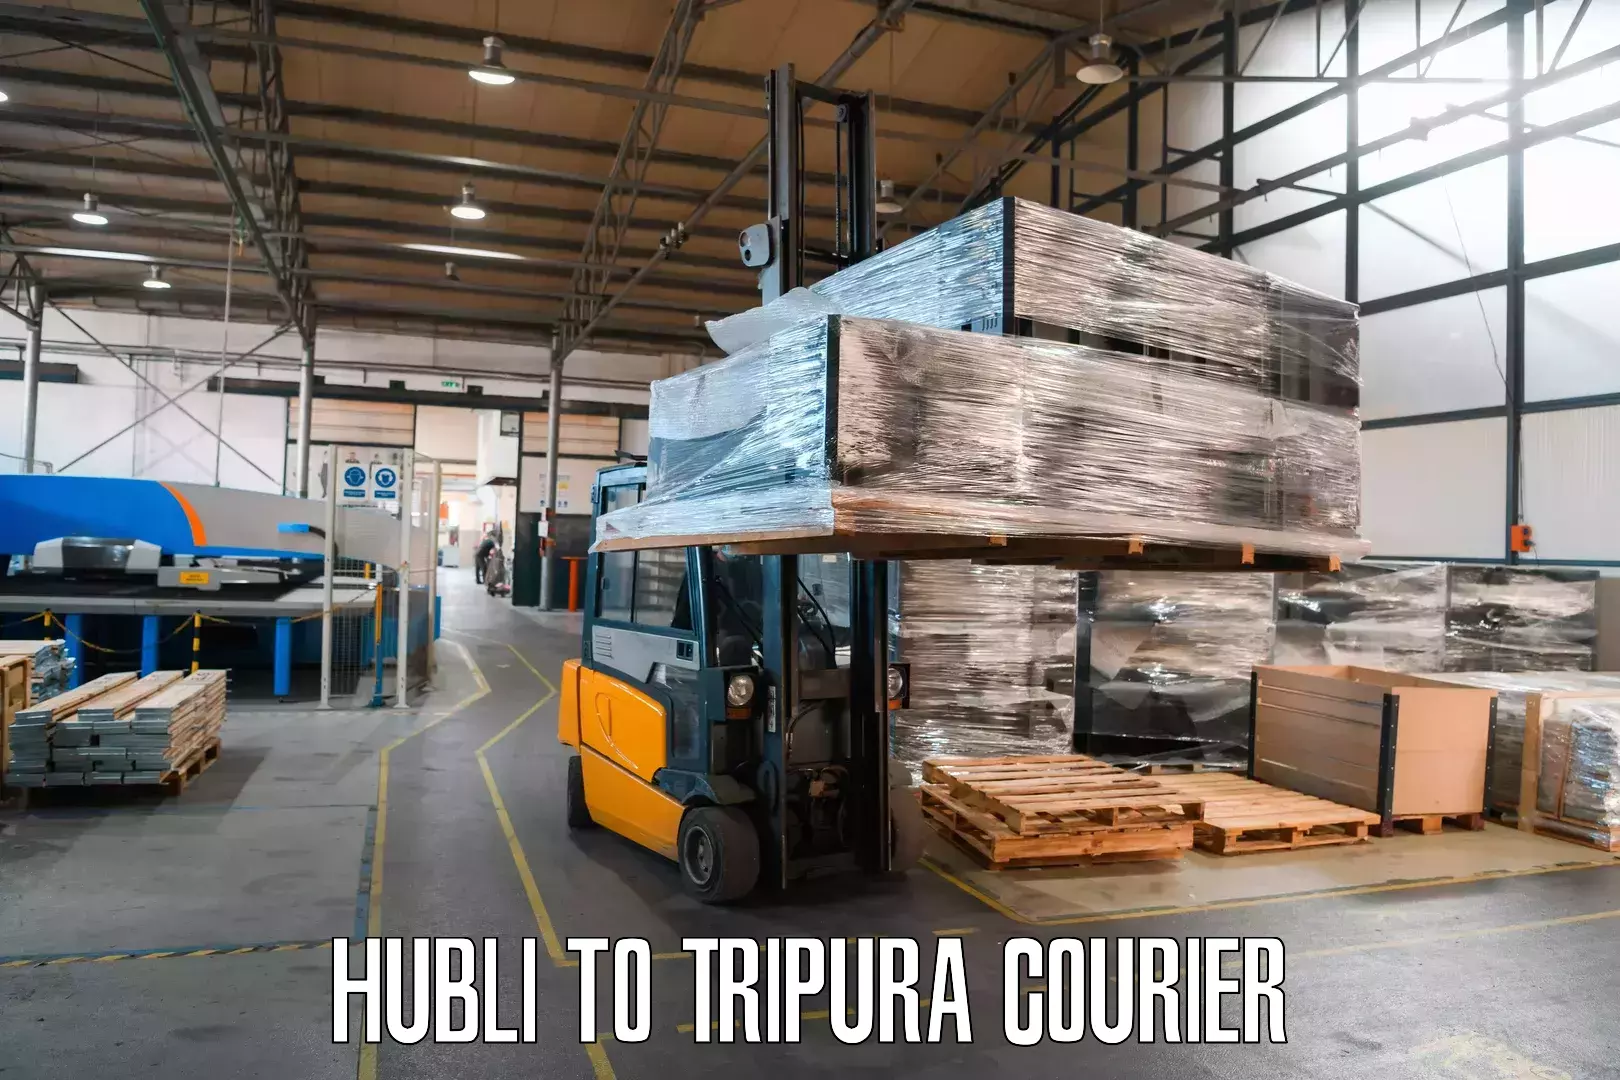 Reliable courier service Hubli to Tripura